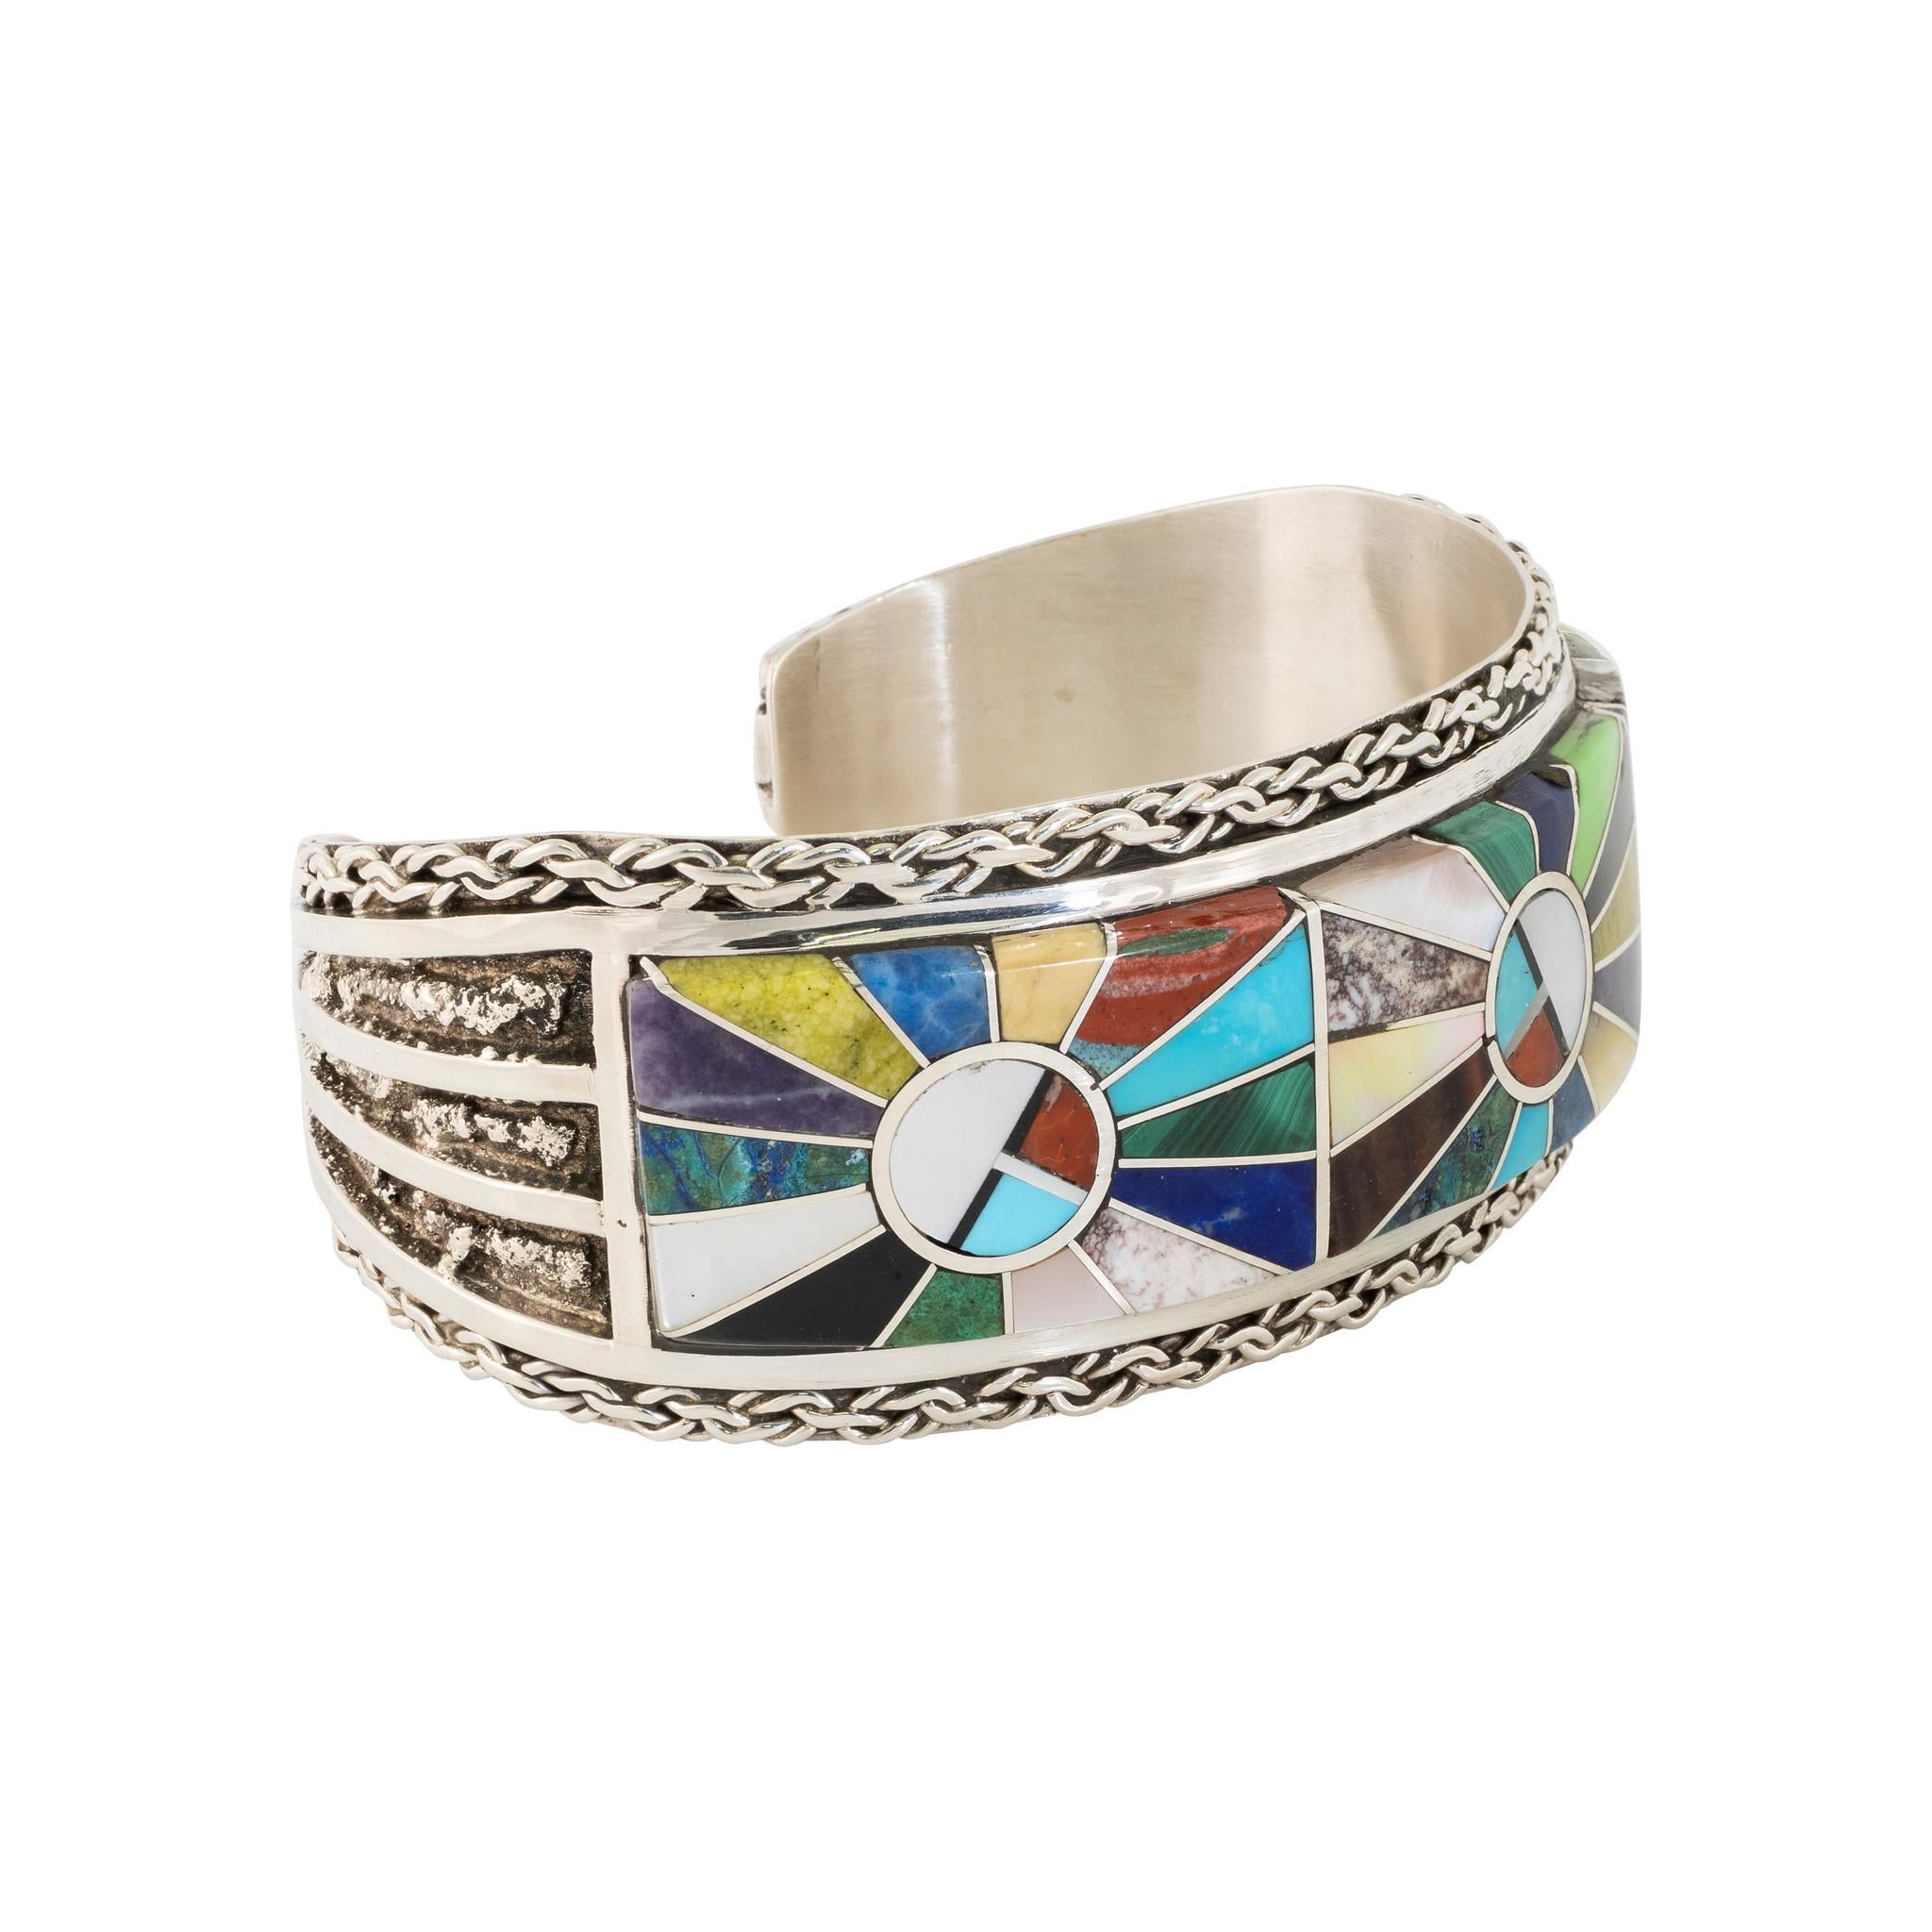 Beautiful Zuni bracelet of various geometric inlaid stones set in sterling silver with fine twisted chain link border. Sits flush against the skin. Stones consist of turquoise, abalone, mother of pearl, onyx, coral, malachite, lapis and white